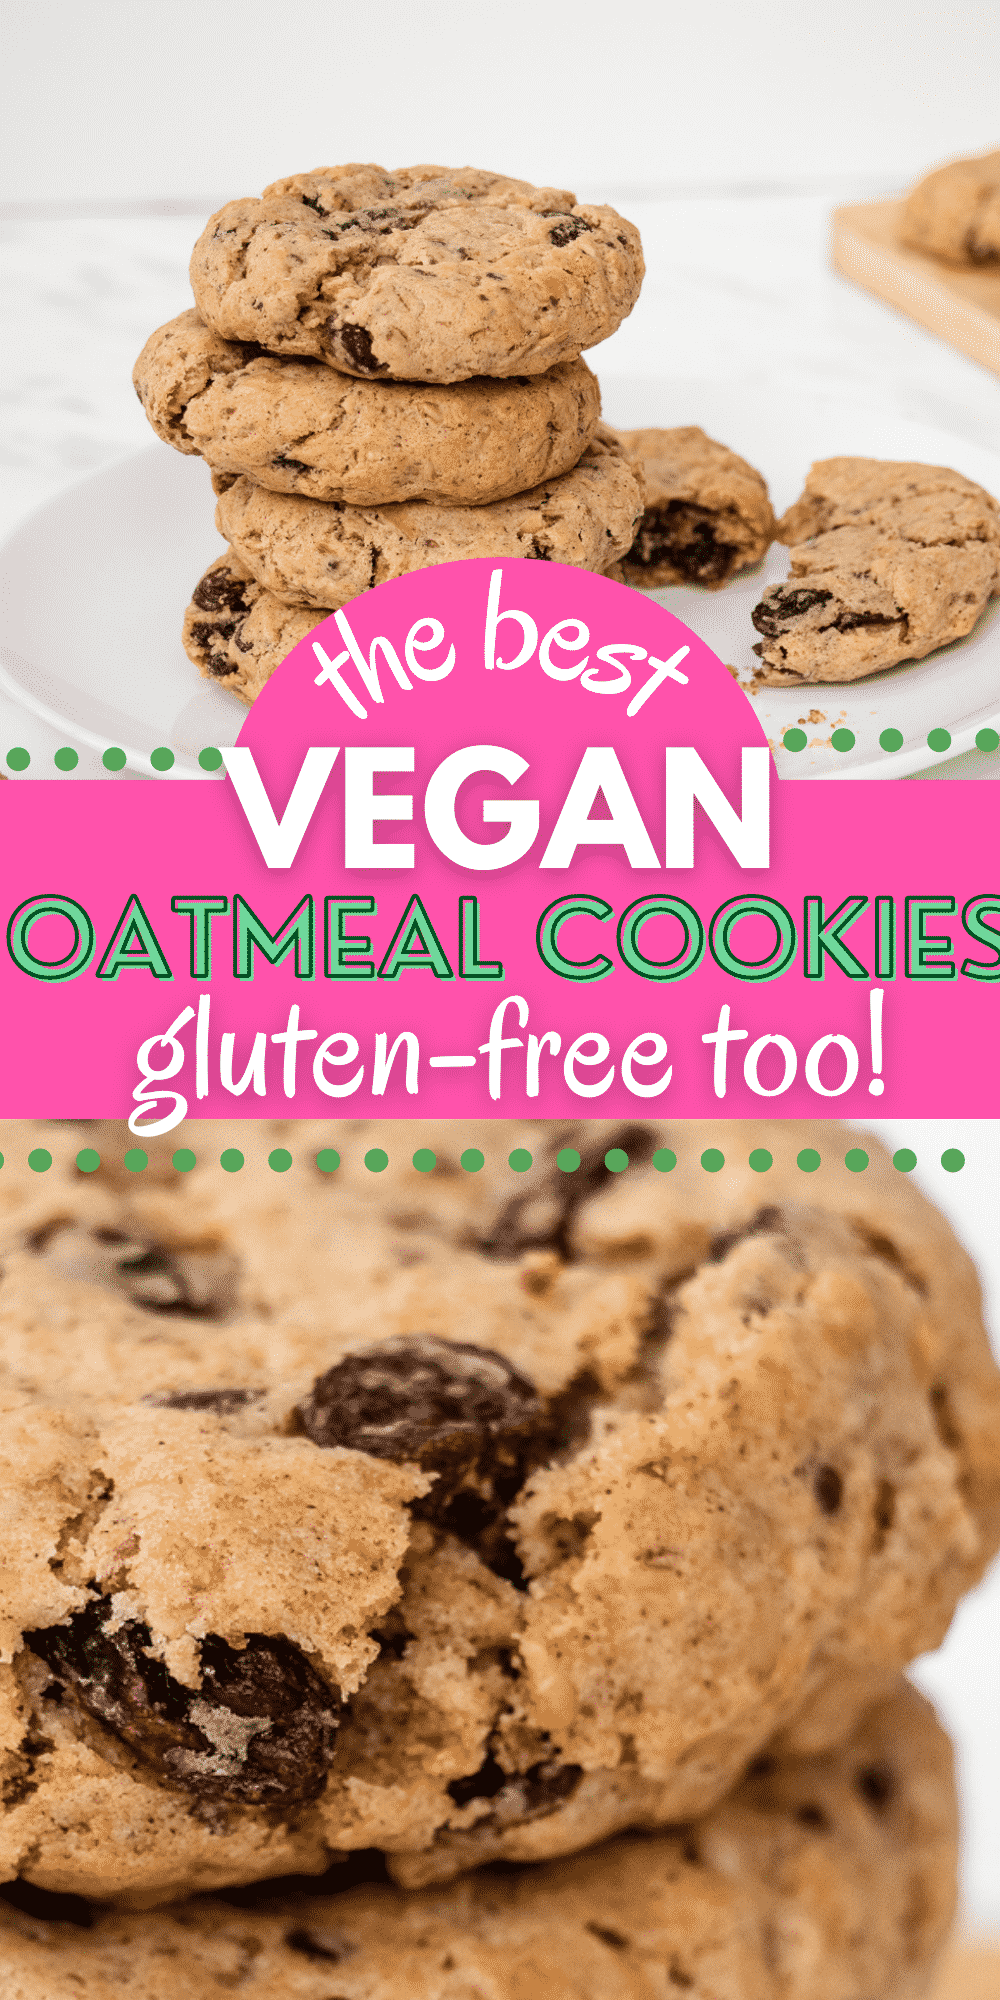 These Vegan Oatmeal Cookies are totally gluten free and a great Celiac snack! They're super easy to whip together with gluten-free rolled oats, yummy raisins, and a pinch of cinnamon.